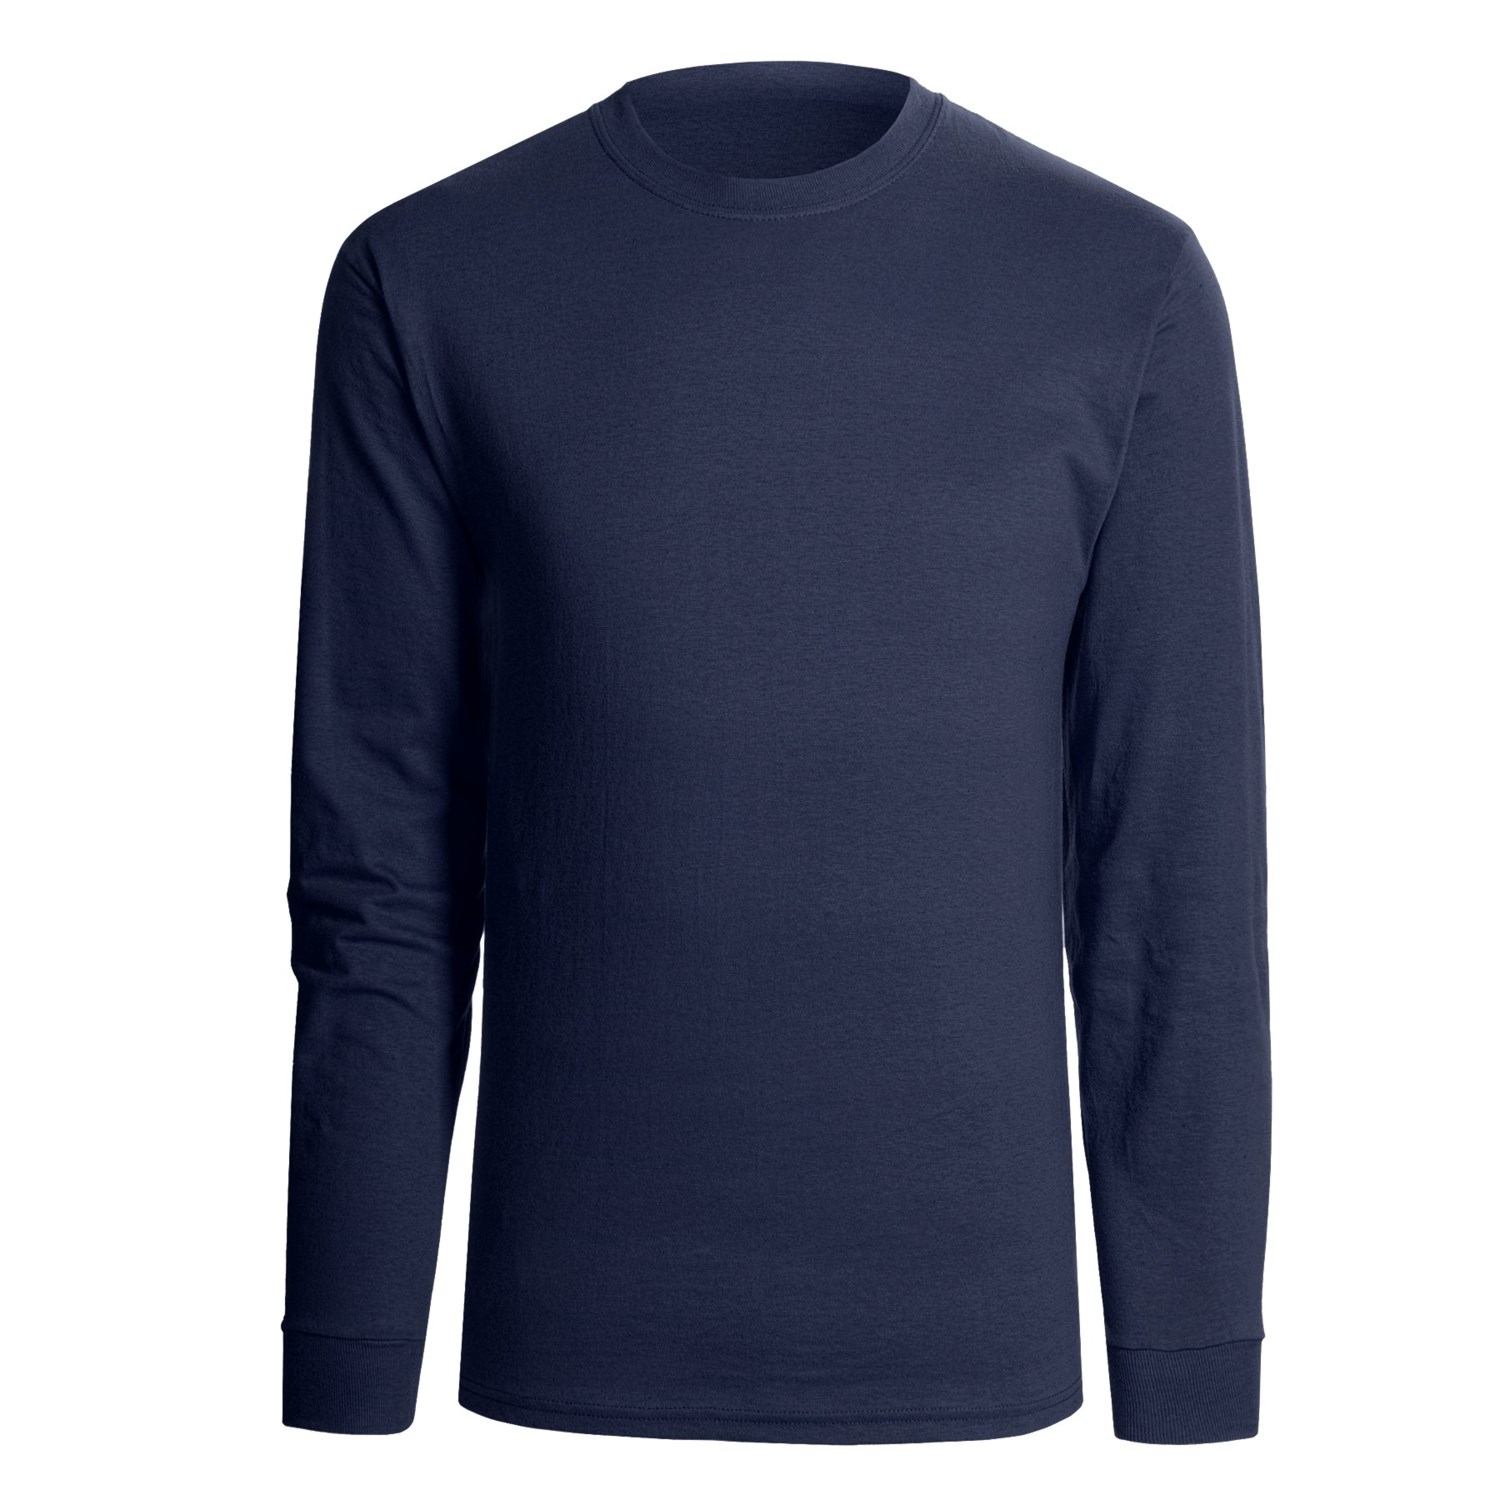 Hanes Beefy T Shirt   Long Sleeve (For Men and Women)   Save 54% 